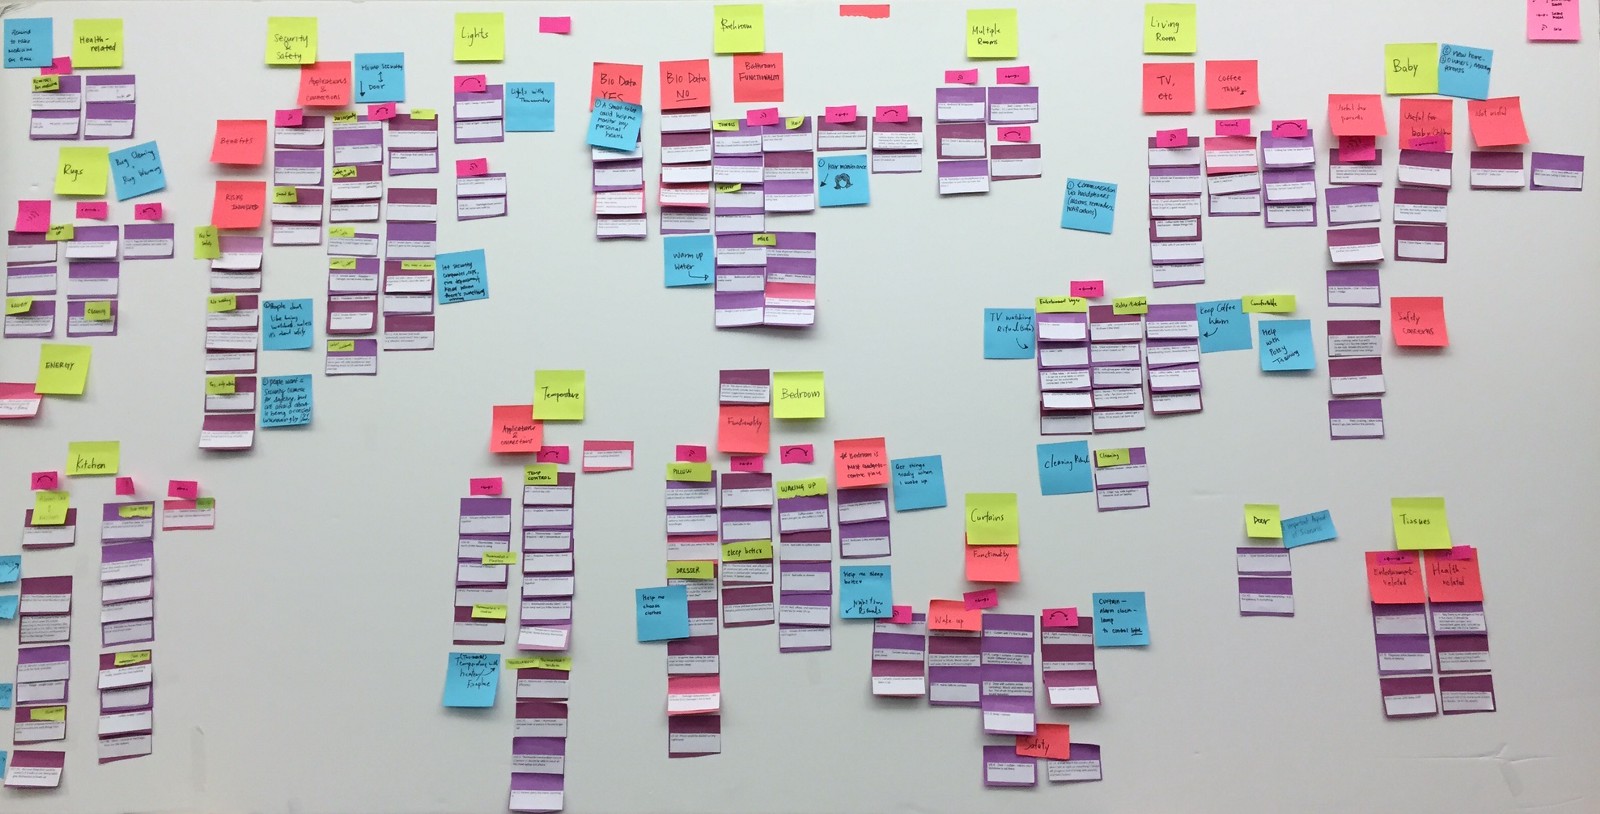 Brainstorm ideas using affinity diagram technique with sticky notes